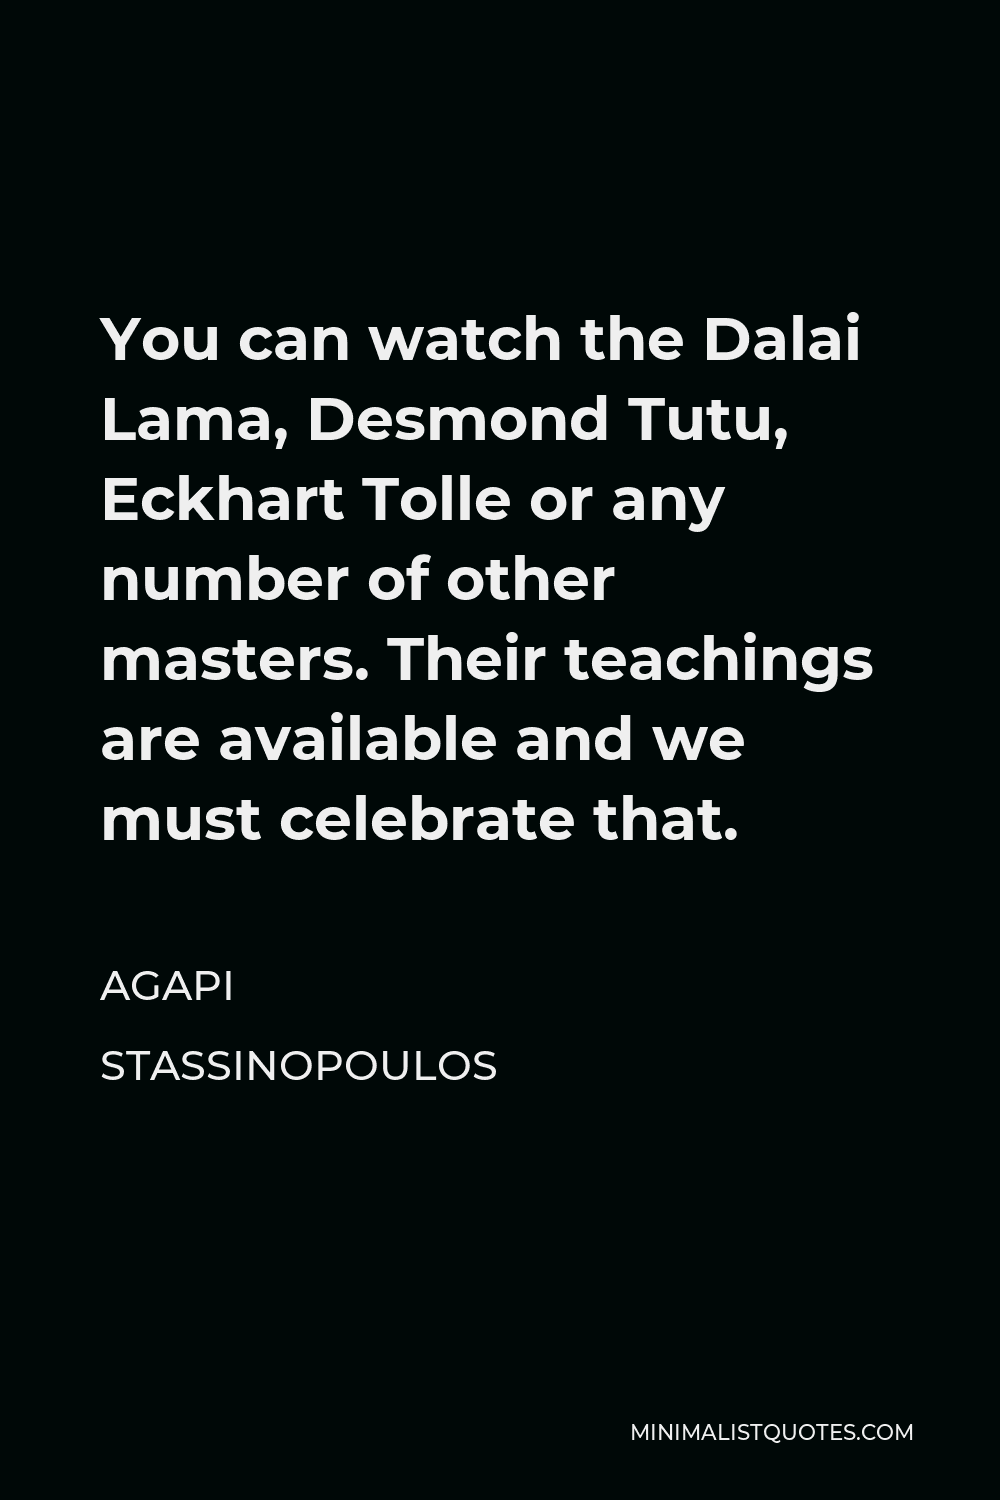 Agapi Stassinopoulos Quote - You can watch the Dalai Lama, Desmond Tutu, Eckhart Tolle or any number of other masters. Their teachings are available and we must celebrate that.